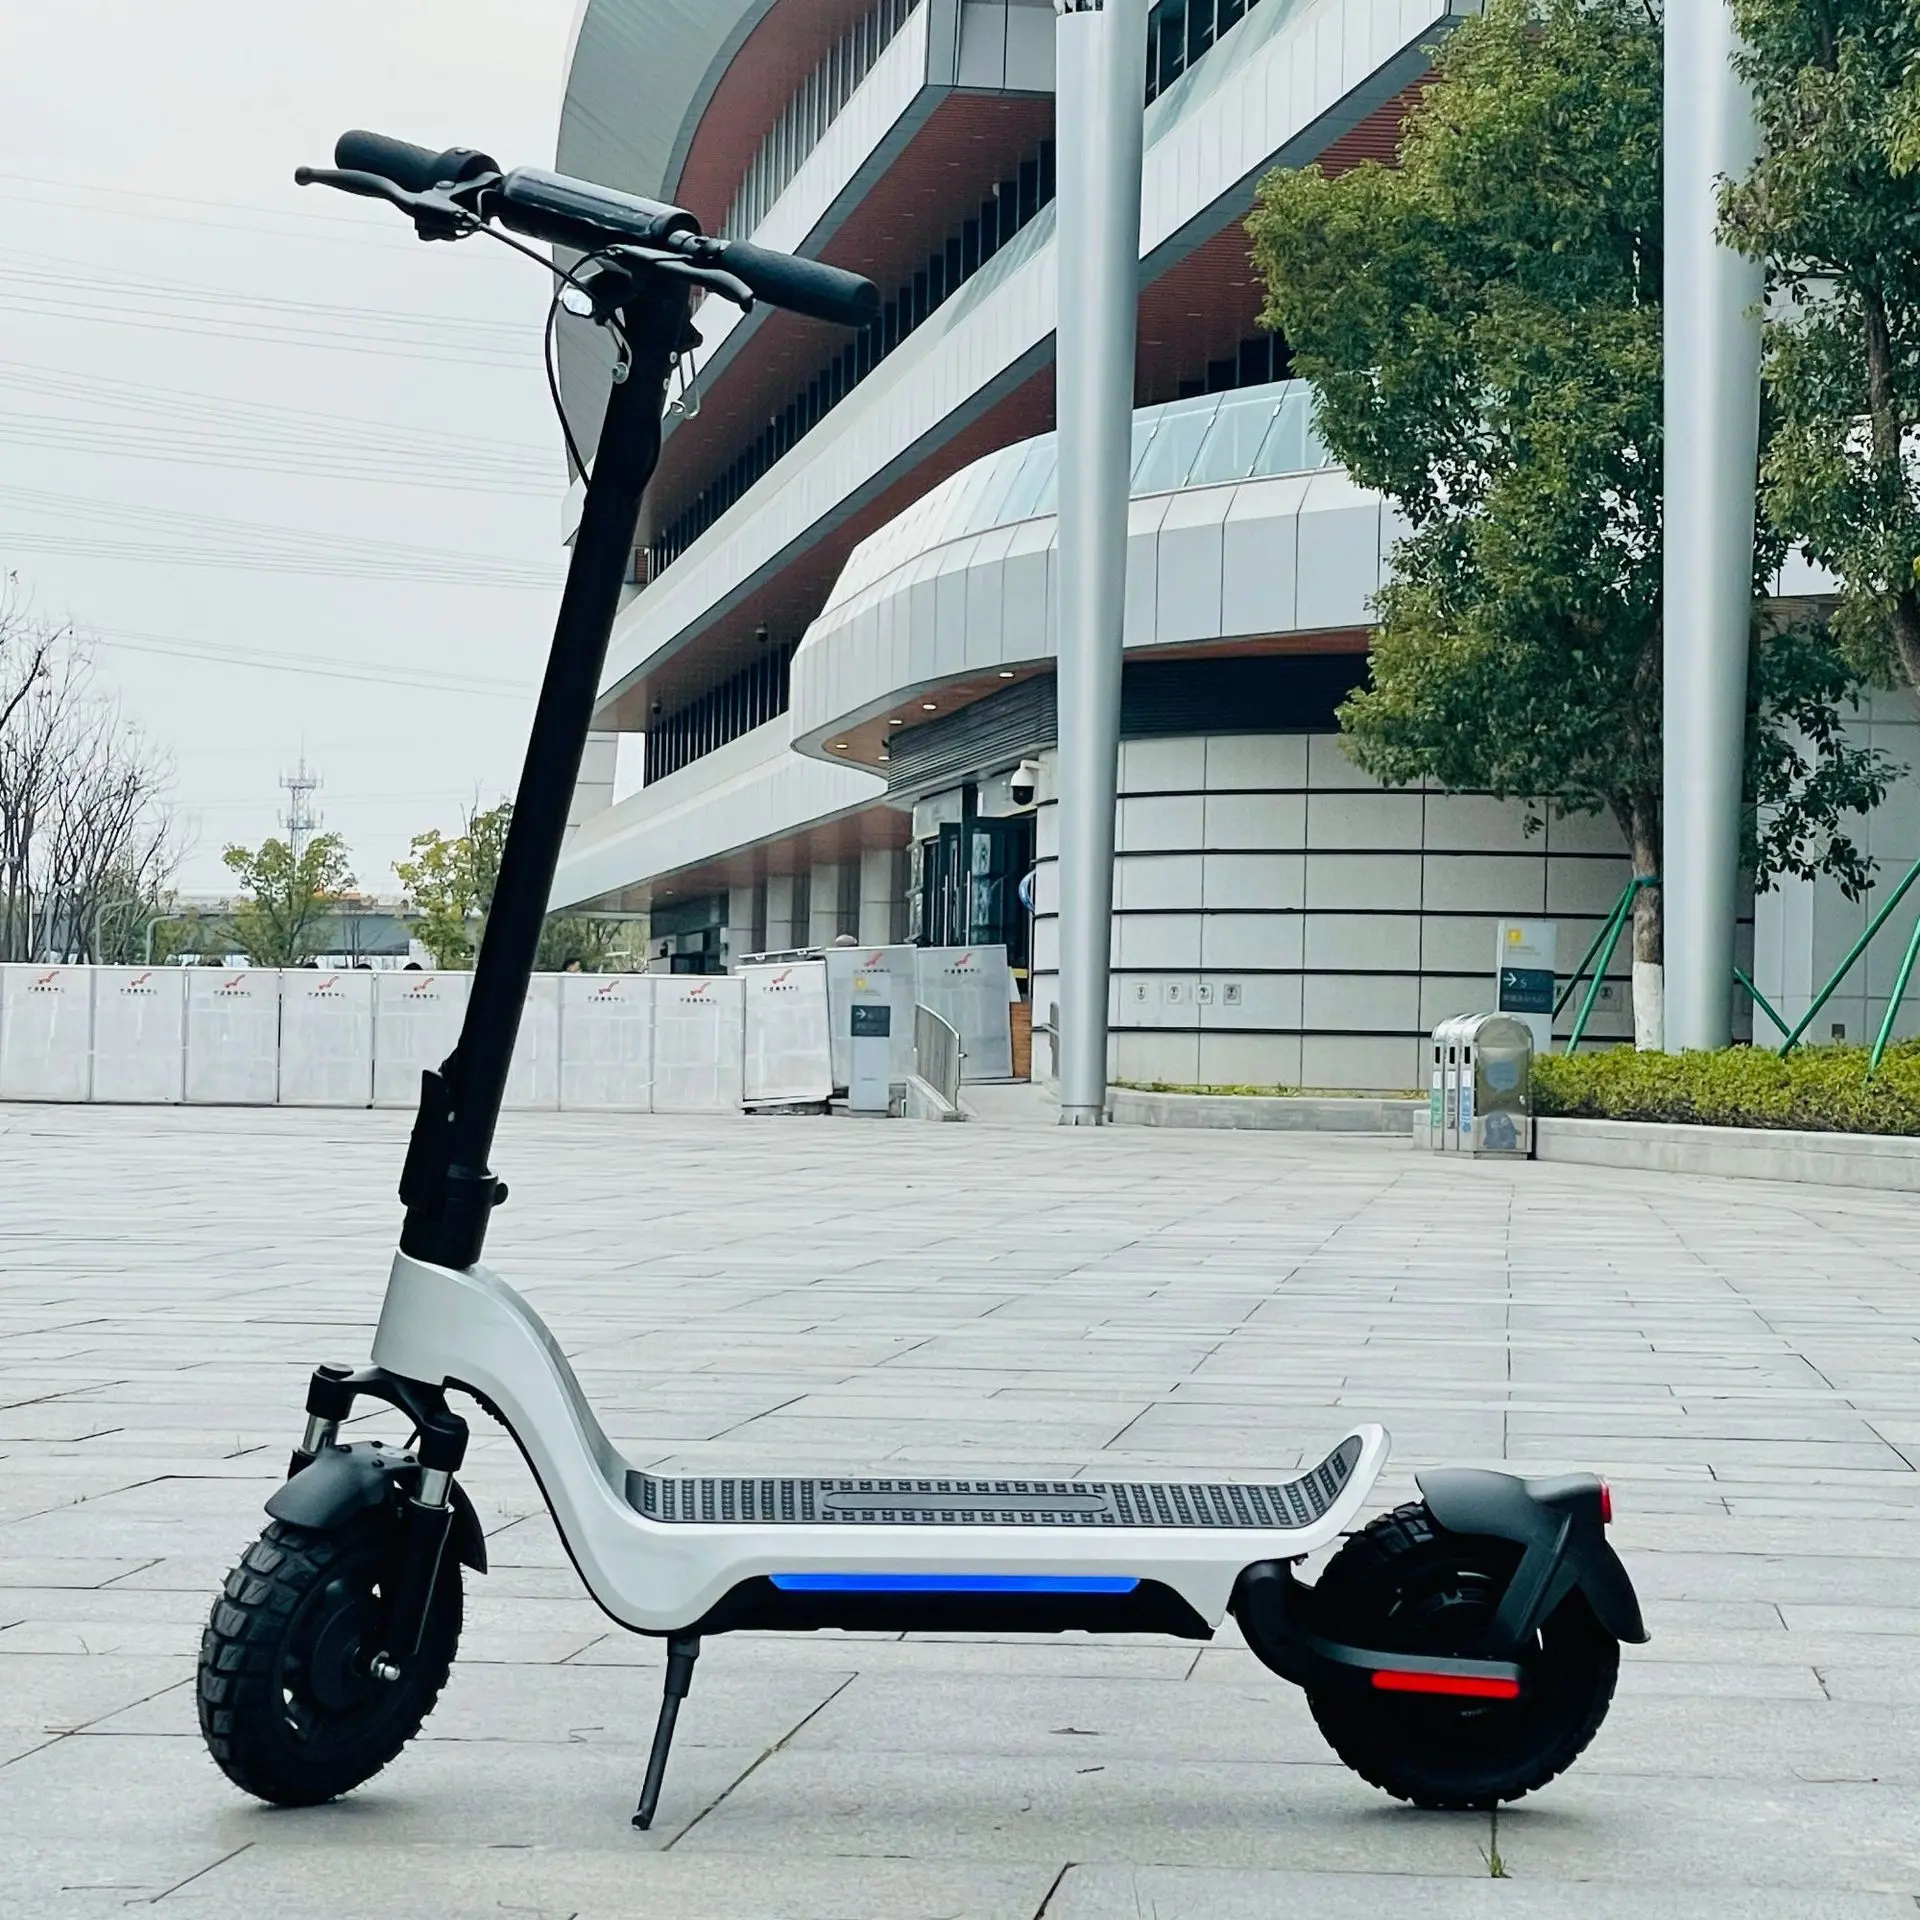 Wholesale ShowMe e scooters for fat tyers 48v 600w fast 45km/h long 45-65km electric scooter From m.alibaba.com